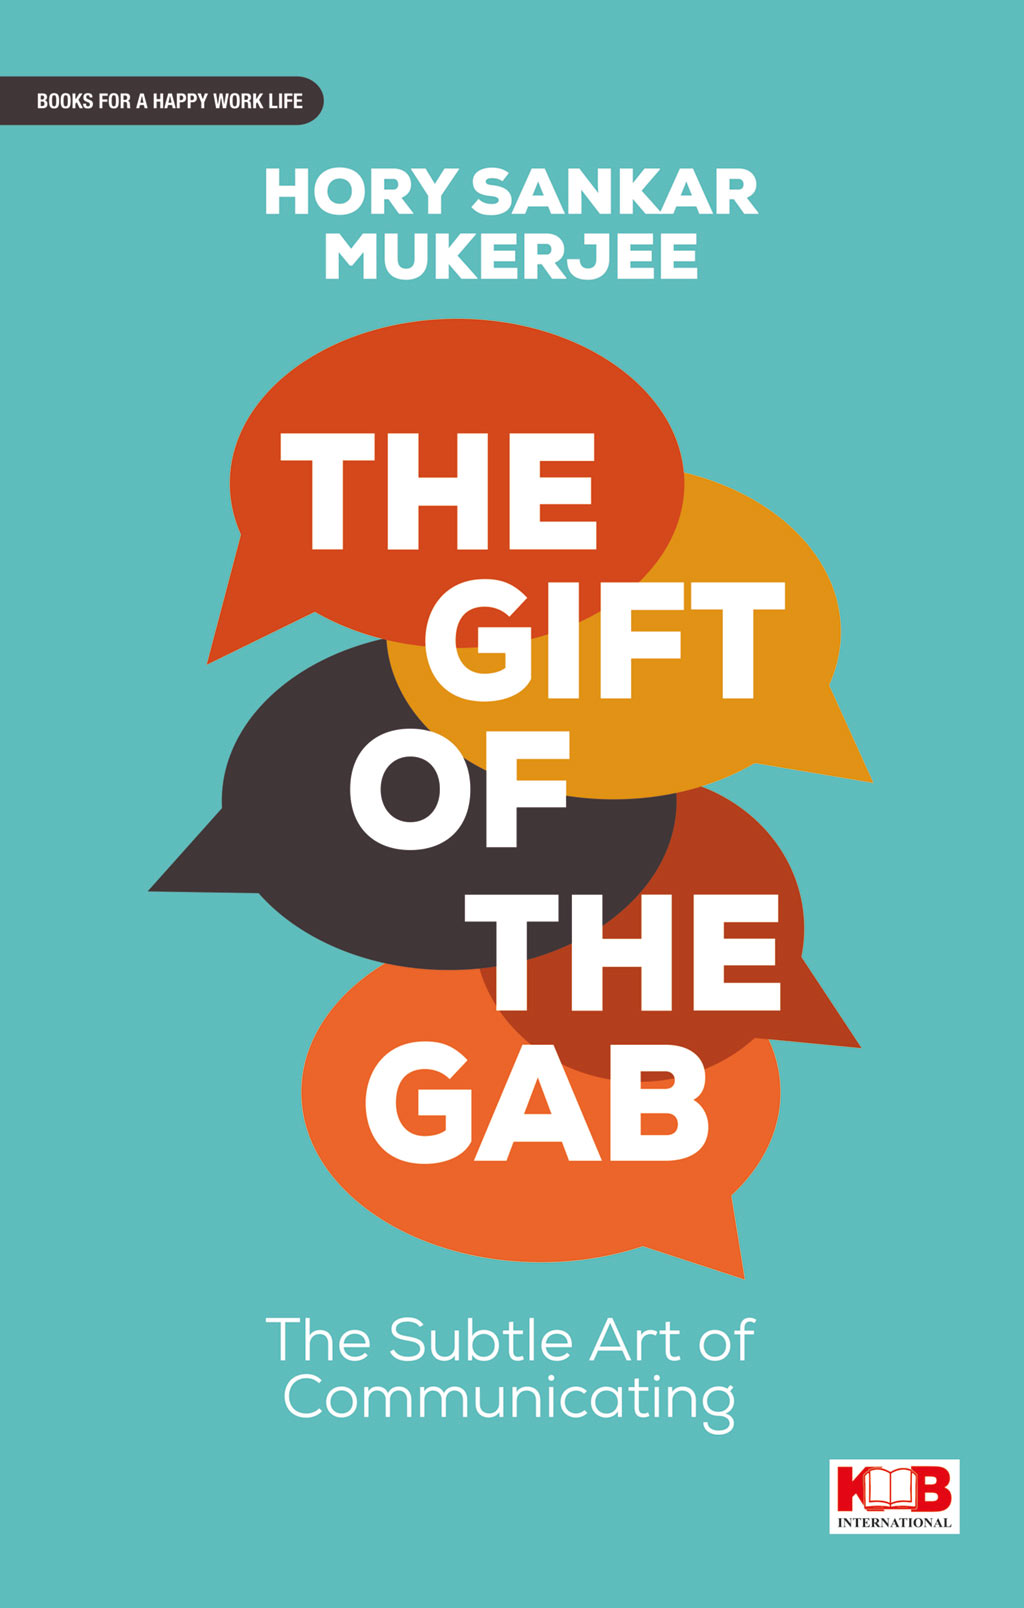 The Gift of Gab, Ireland Day 3 & 4 | The Joy of Travel